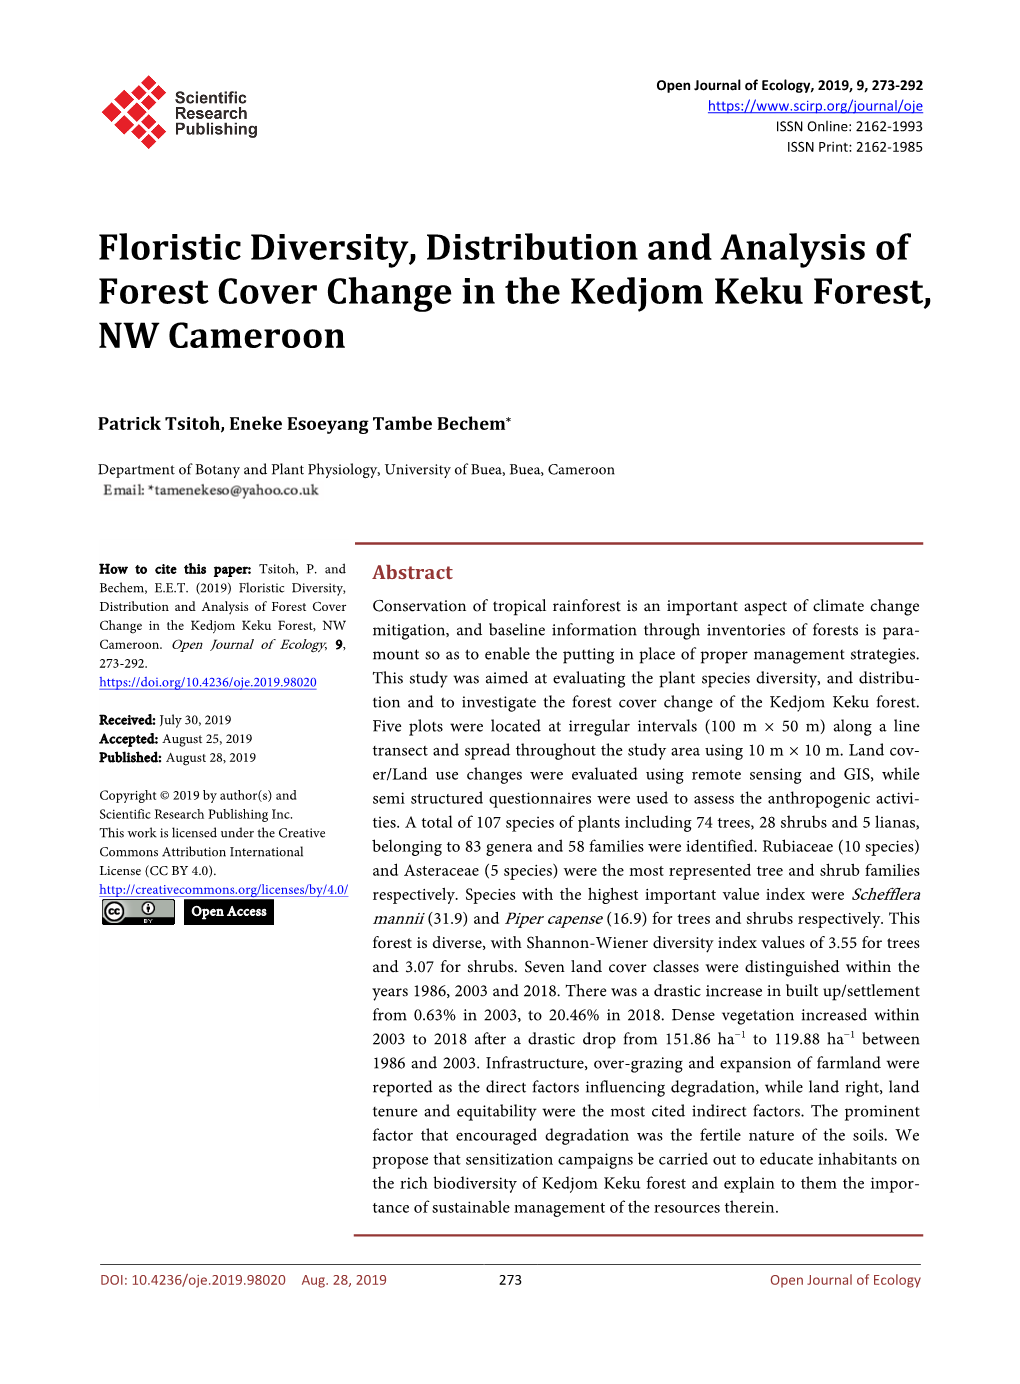 Floristic Diversity, Distribution and Analysis of Forest Cover Change in the Kedjom Keku Forest, NW Cameroon